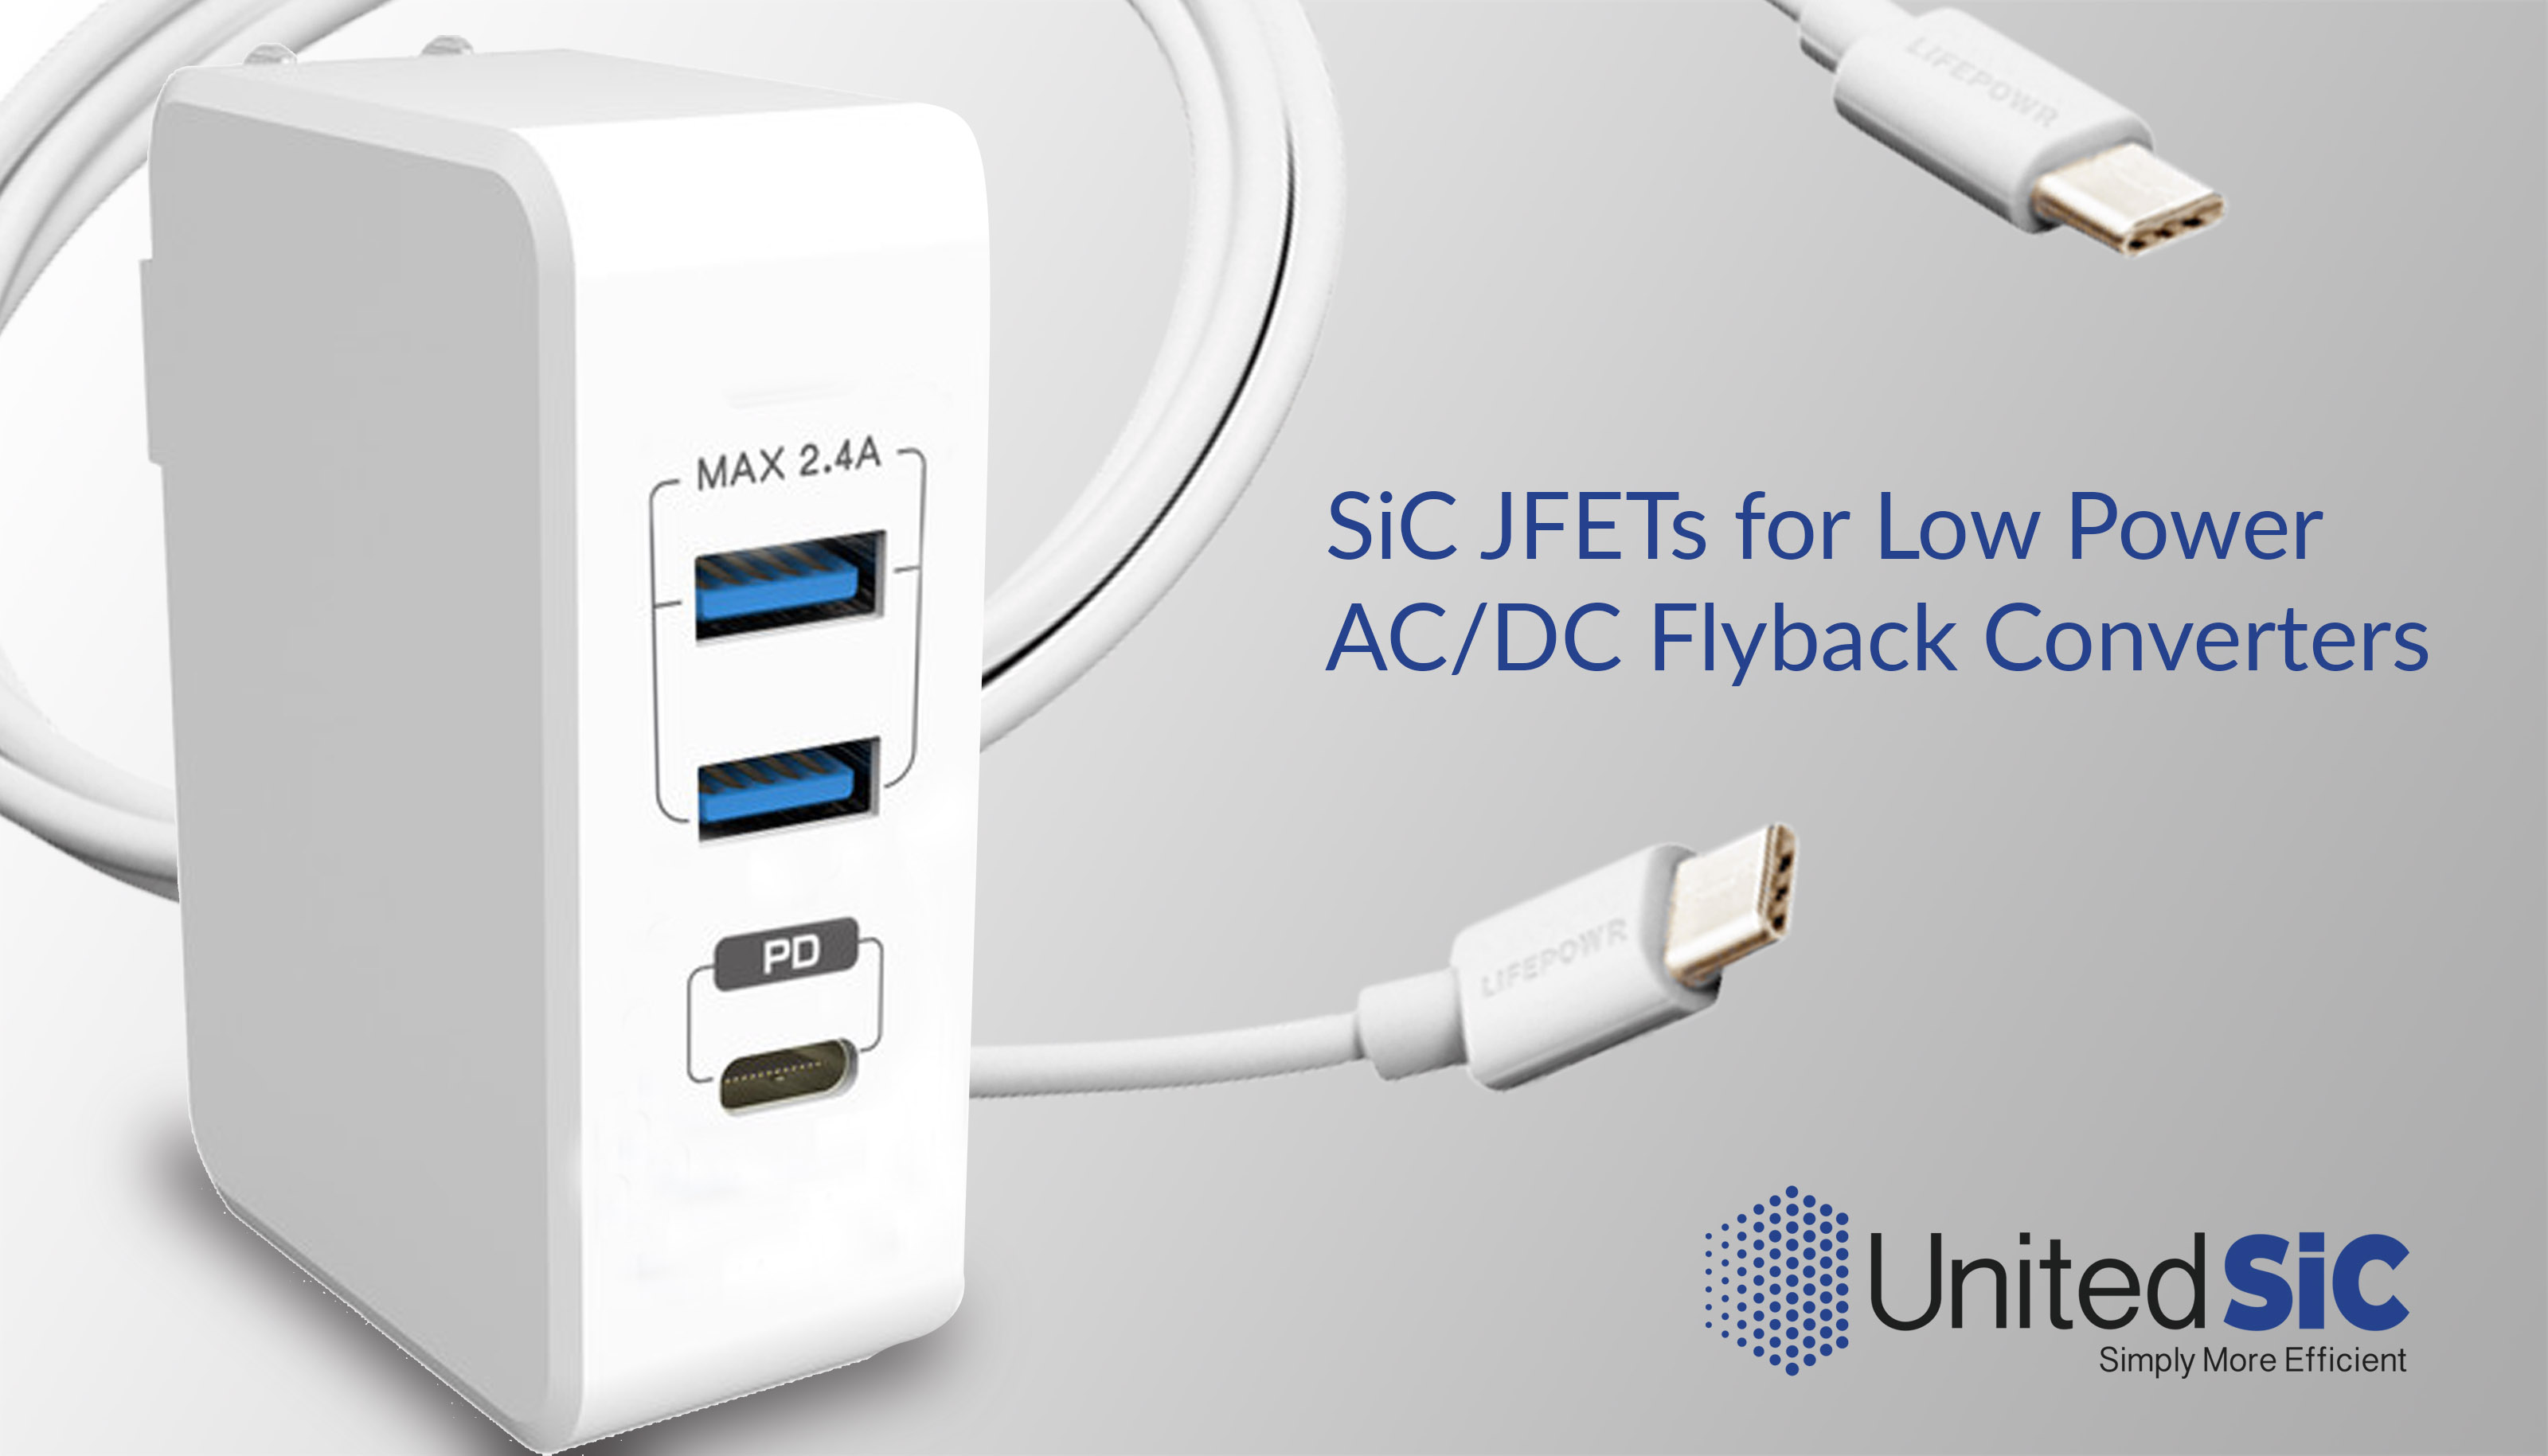 UnitedSiC announces SiC JFET family for low power  AC-DC Flyback converters